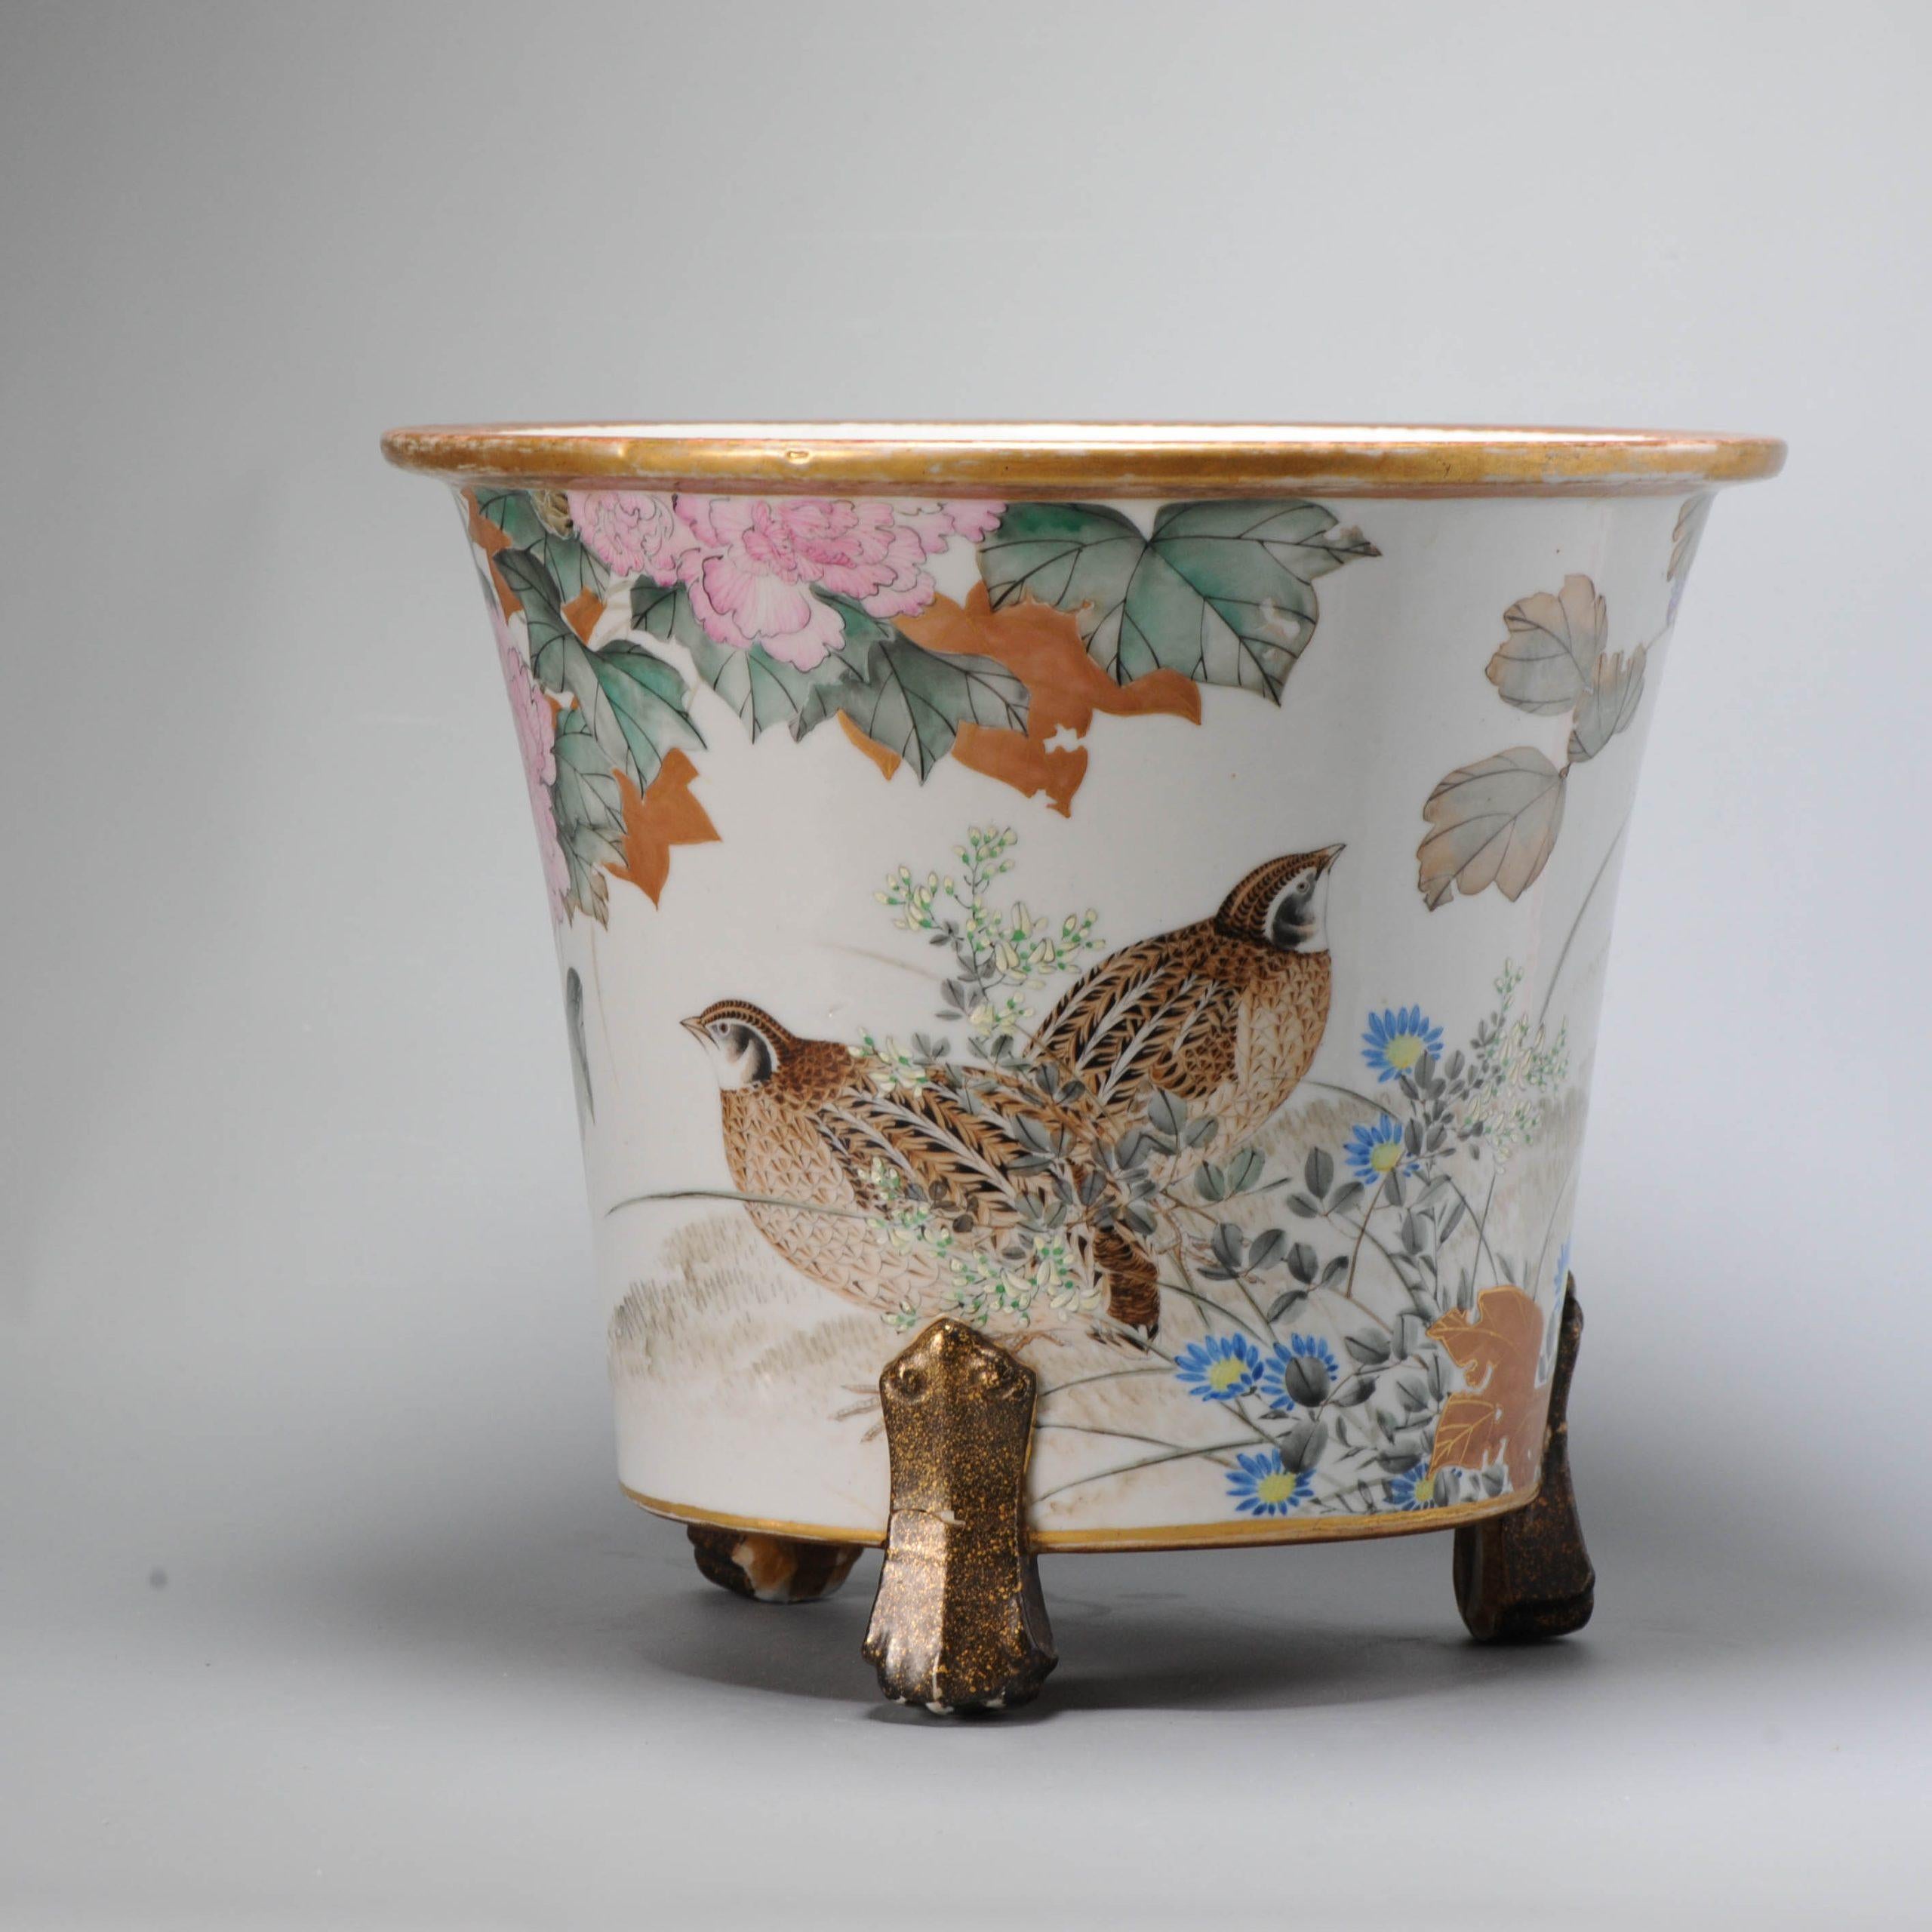 Antique circa 1900 Period Japanese Porcelain Jardiniere Japan Quails Flowers In Good Condition For Sale In Amsterdam, Noord Holland